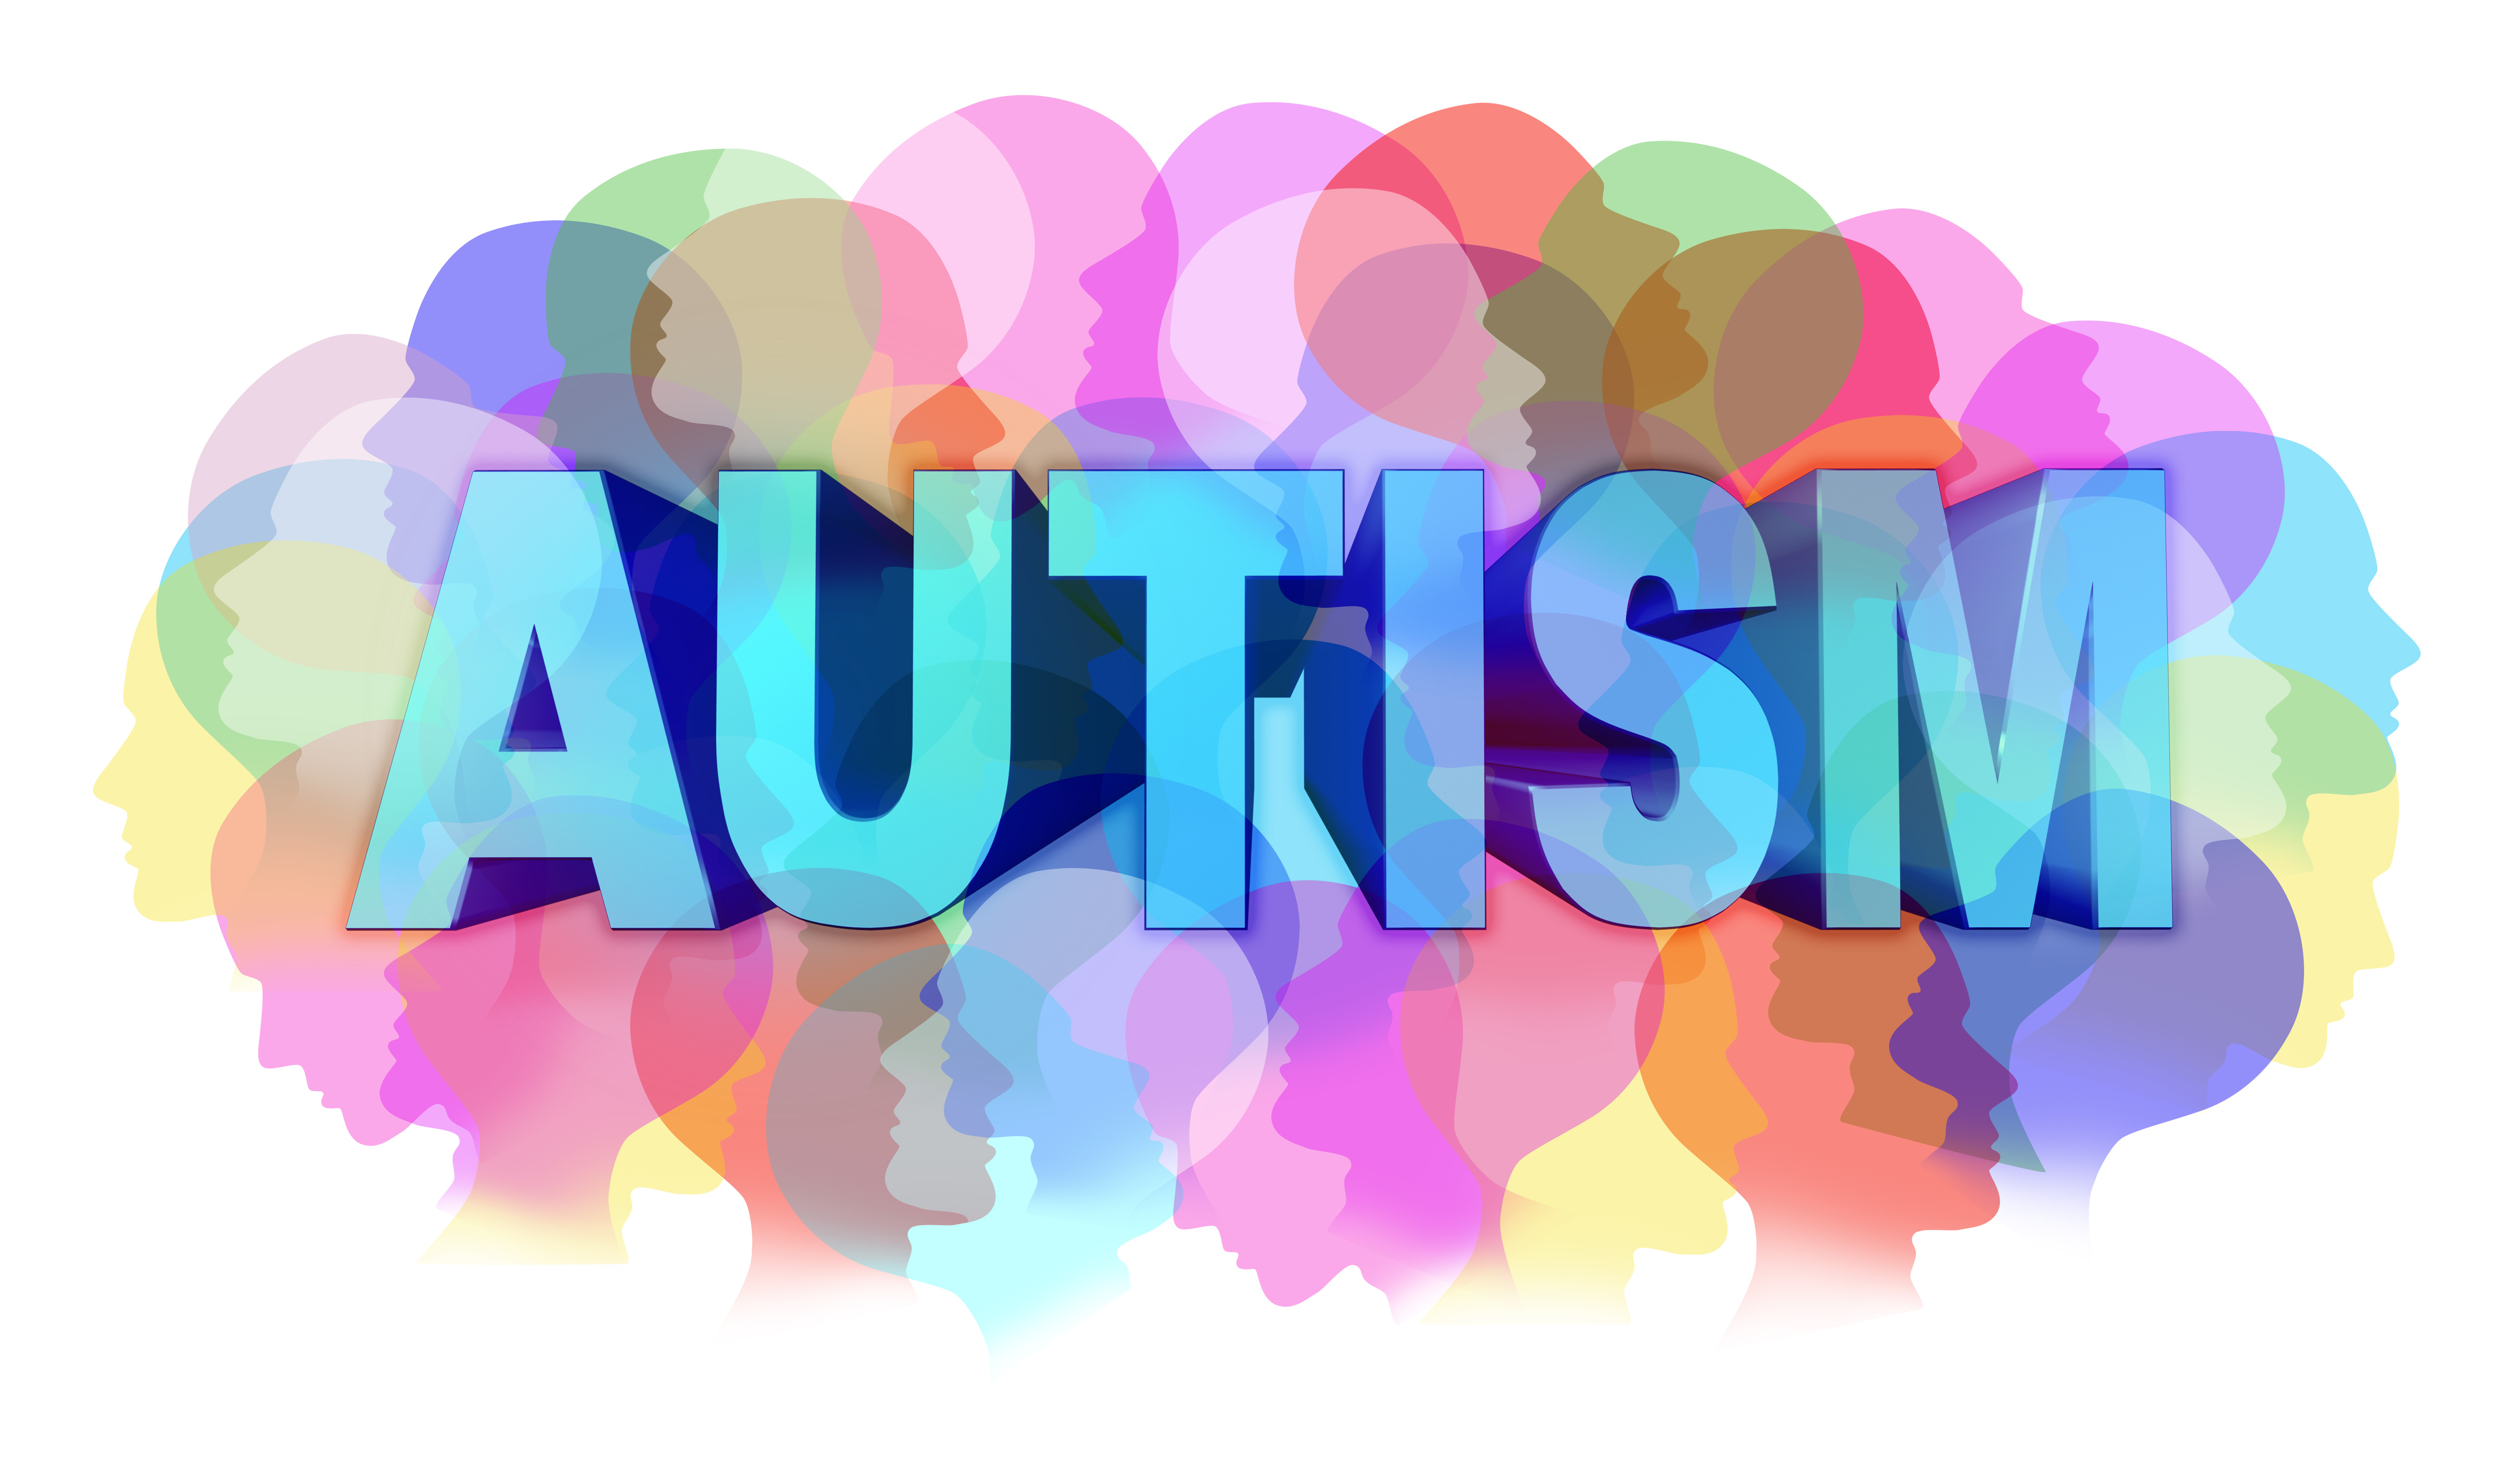 16 autism myths debunked - AboveWhispers | AboveWhispers